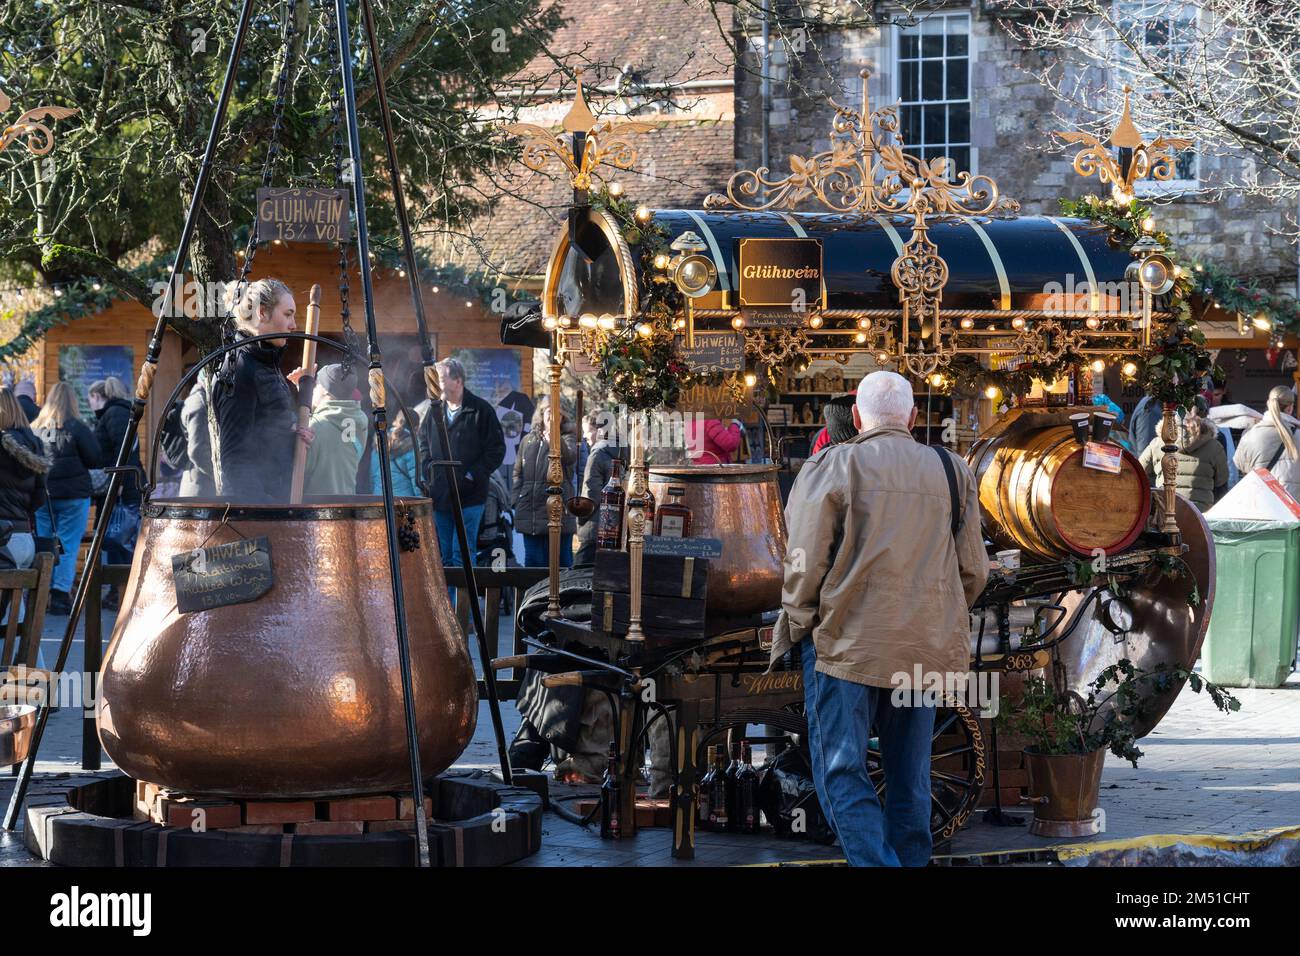 Traditional Glühwein (mulled wine) stand at Winchester Christmas market with a large copper stirring cauldron. At gothic Winchester Cathedral, England Stock Photo